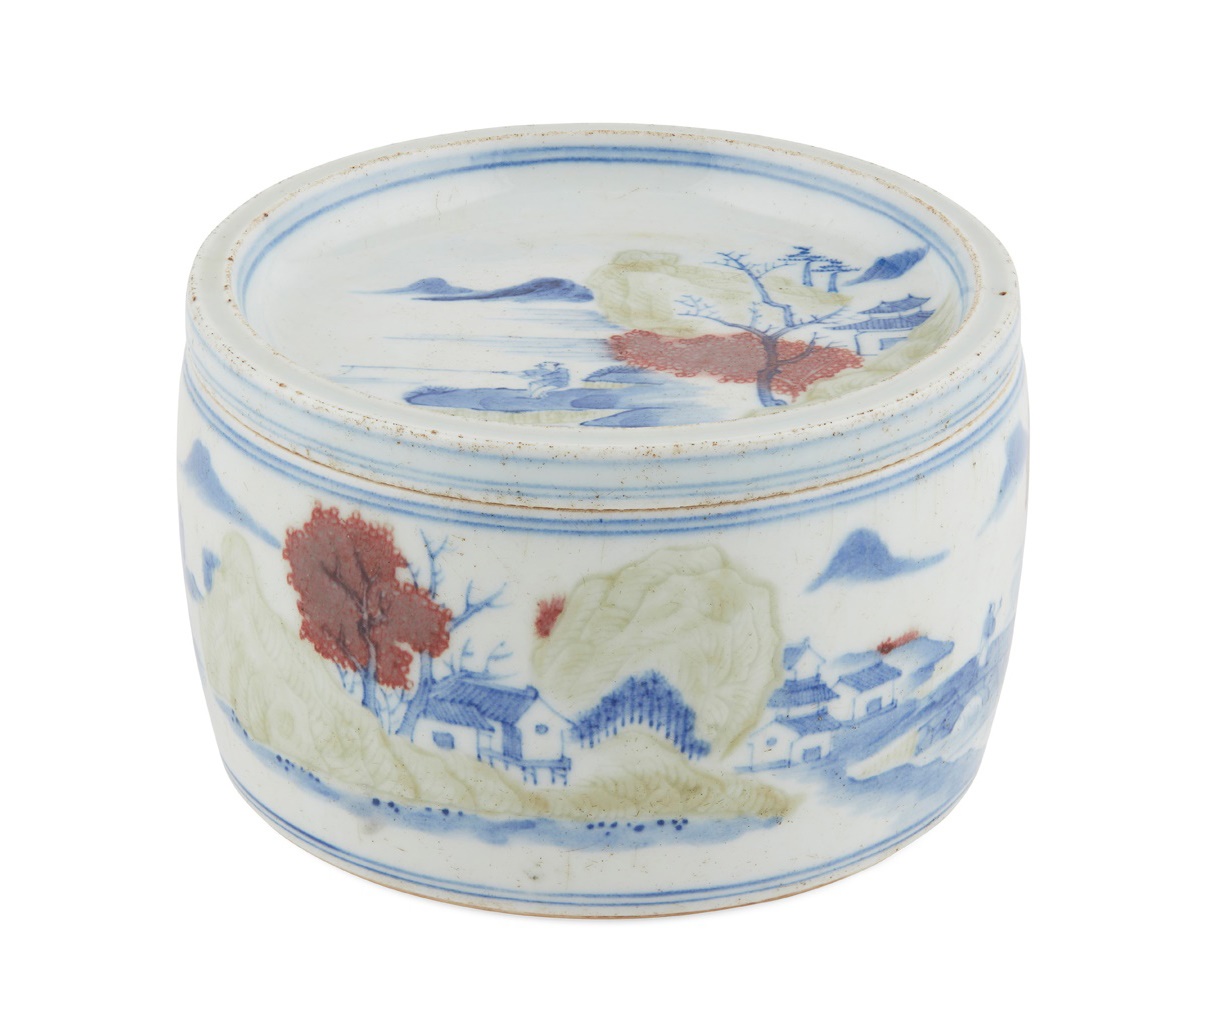 UNDERGLAZE BLUE, COPPER-RED AND CELADON-DECORATED BOX AND COVER QING DYNASTY, 18TH CENTURY 清 紹文堂款 釉下三彩山水人物紋蓋盒